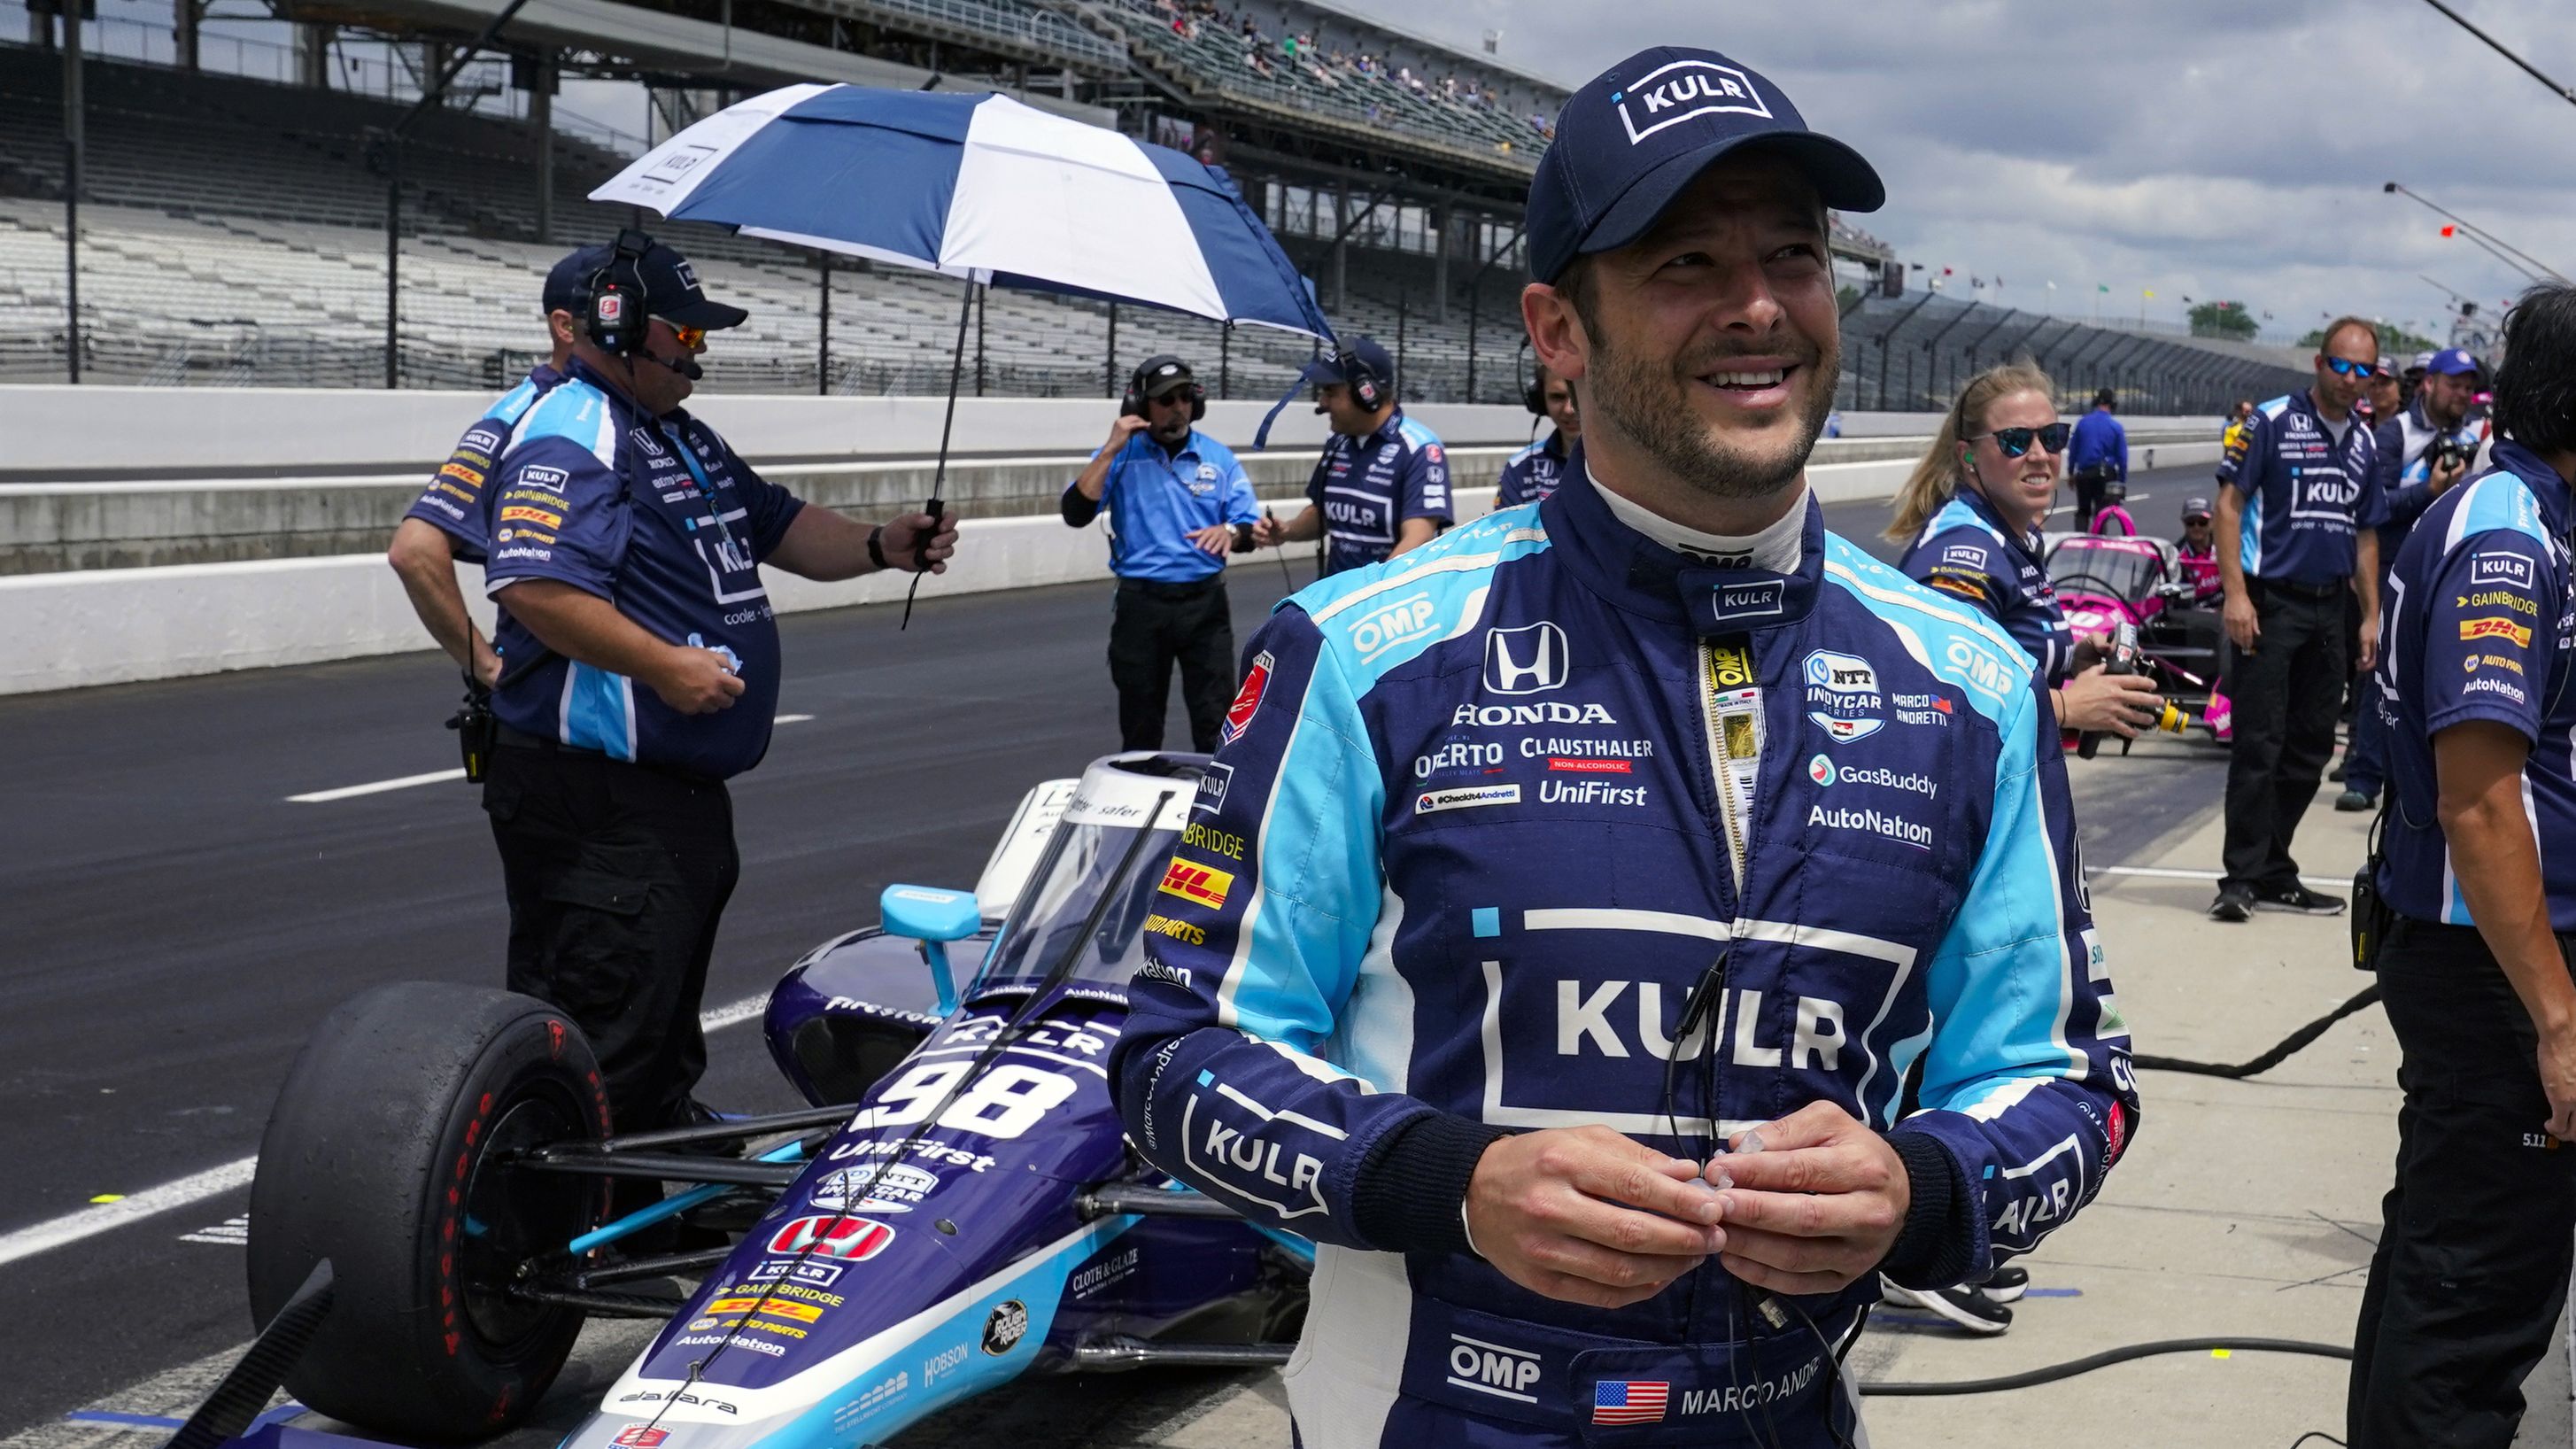 Marco Andretti waits for the start of the final practice for the Indianapolis 500 auto race at Indianapolis Motor Speedway.